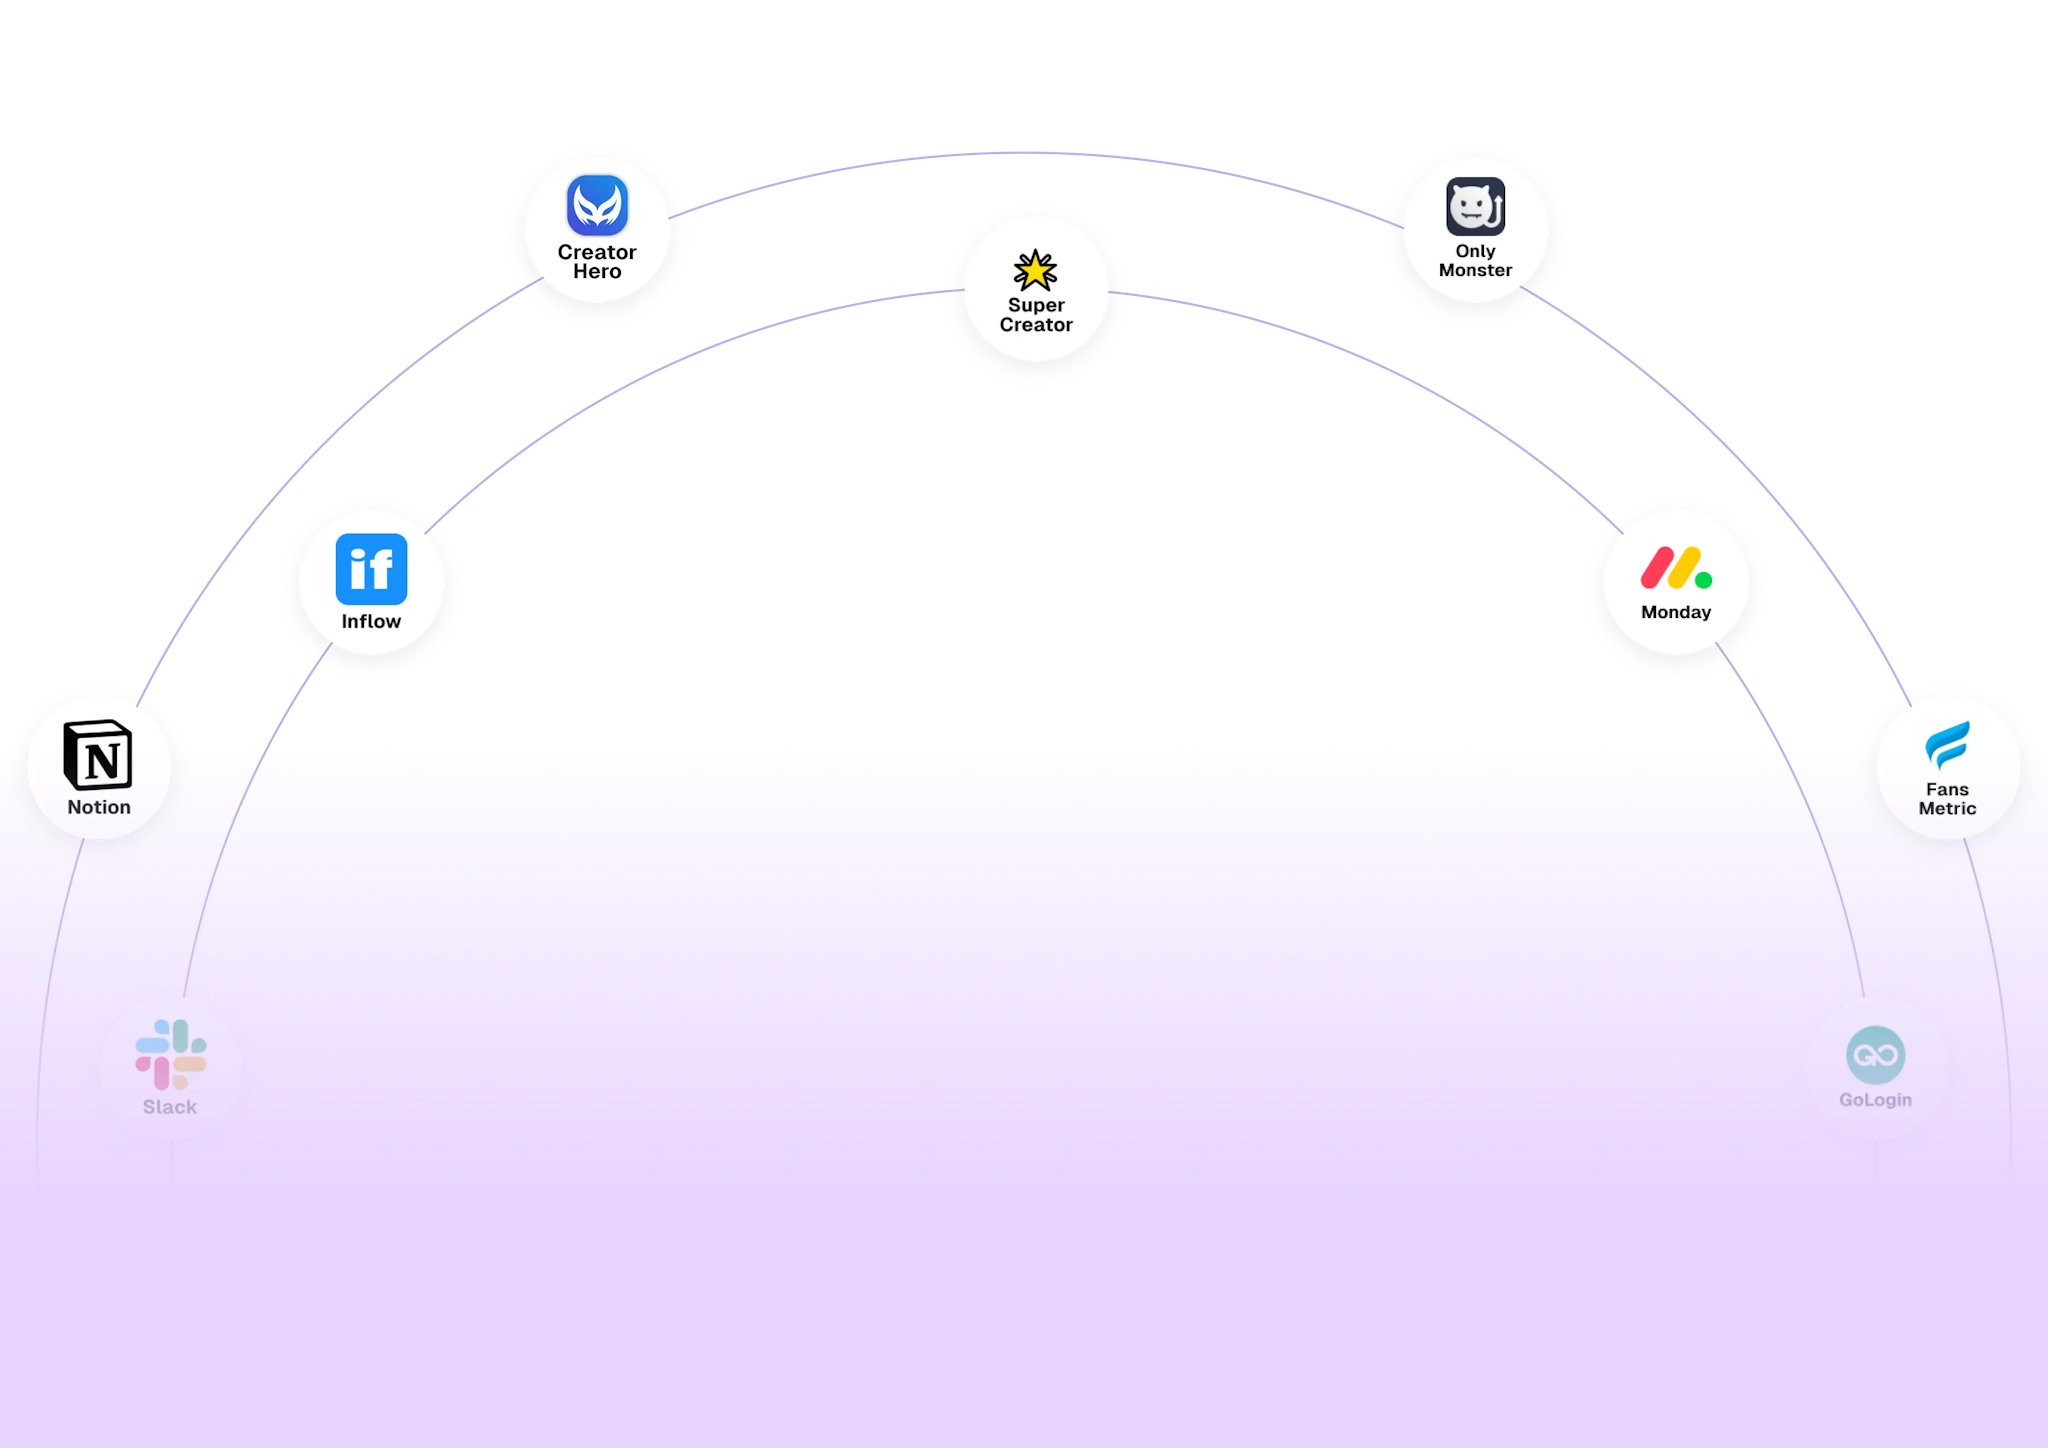 Network diagram of the Top Creator dashboard showcasing integrations with various platforms. Each platform including Asana, Slack, Notion, Inflow, OnlyMonster, Monday.com, GoLogin, and Fans Metric is connected to the central Top Creator system, indicating a comprehensive suite of tools for content creation and management.